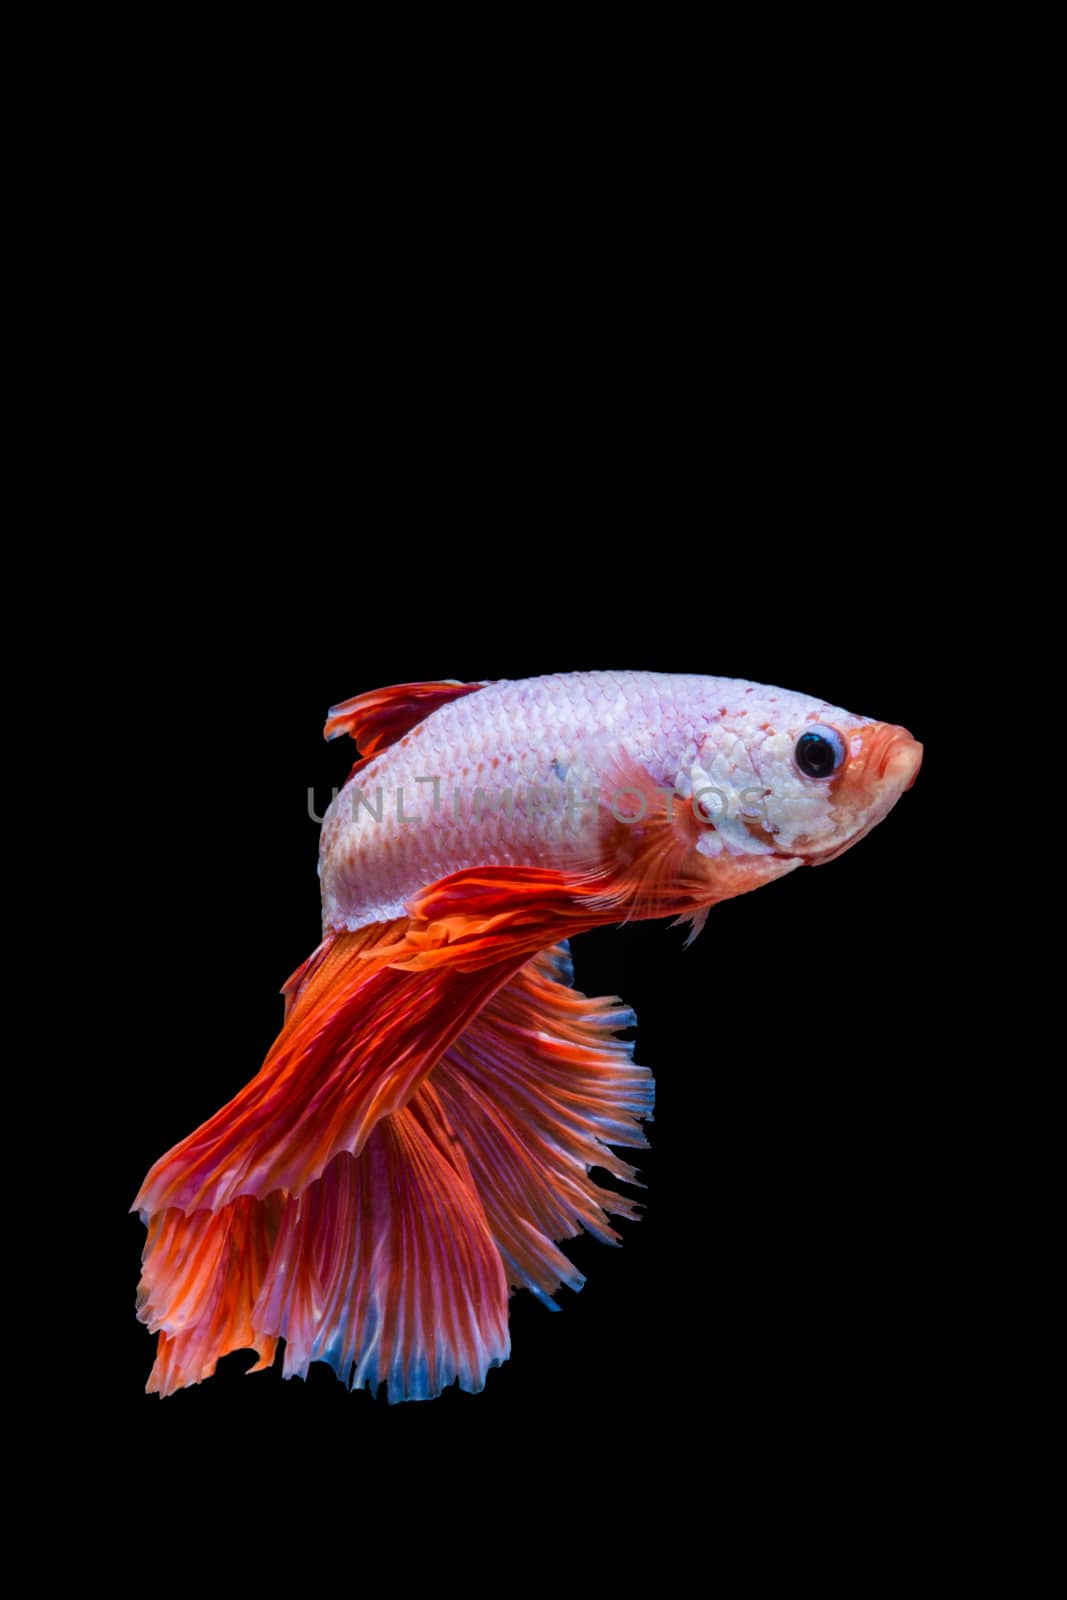 Pink and red betta fish, siamese fighting fish on black backgrou by yuiyuize